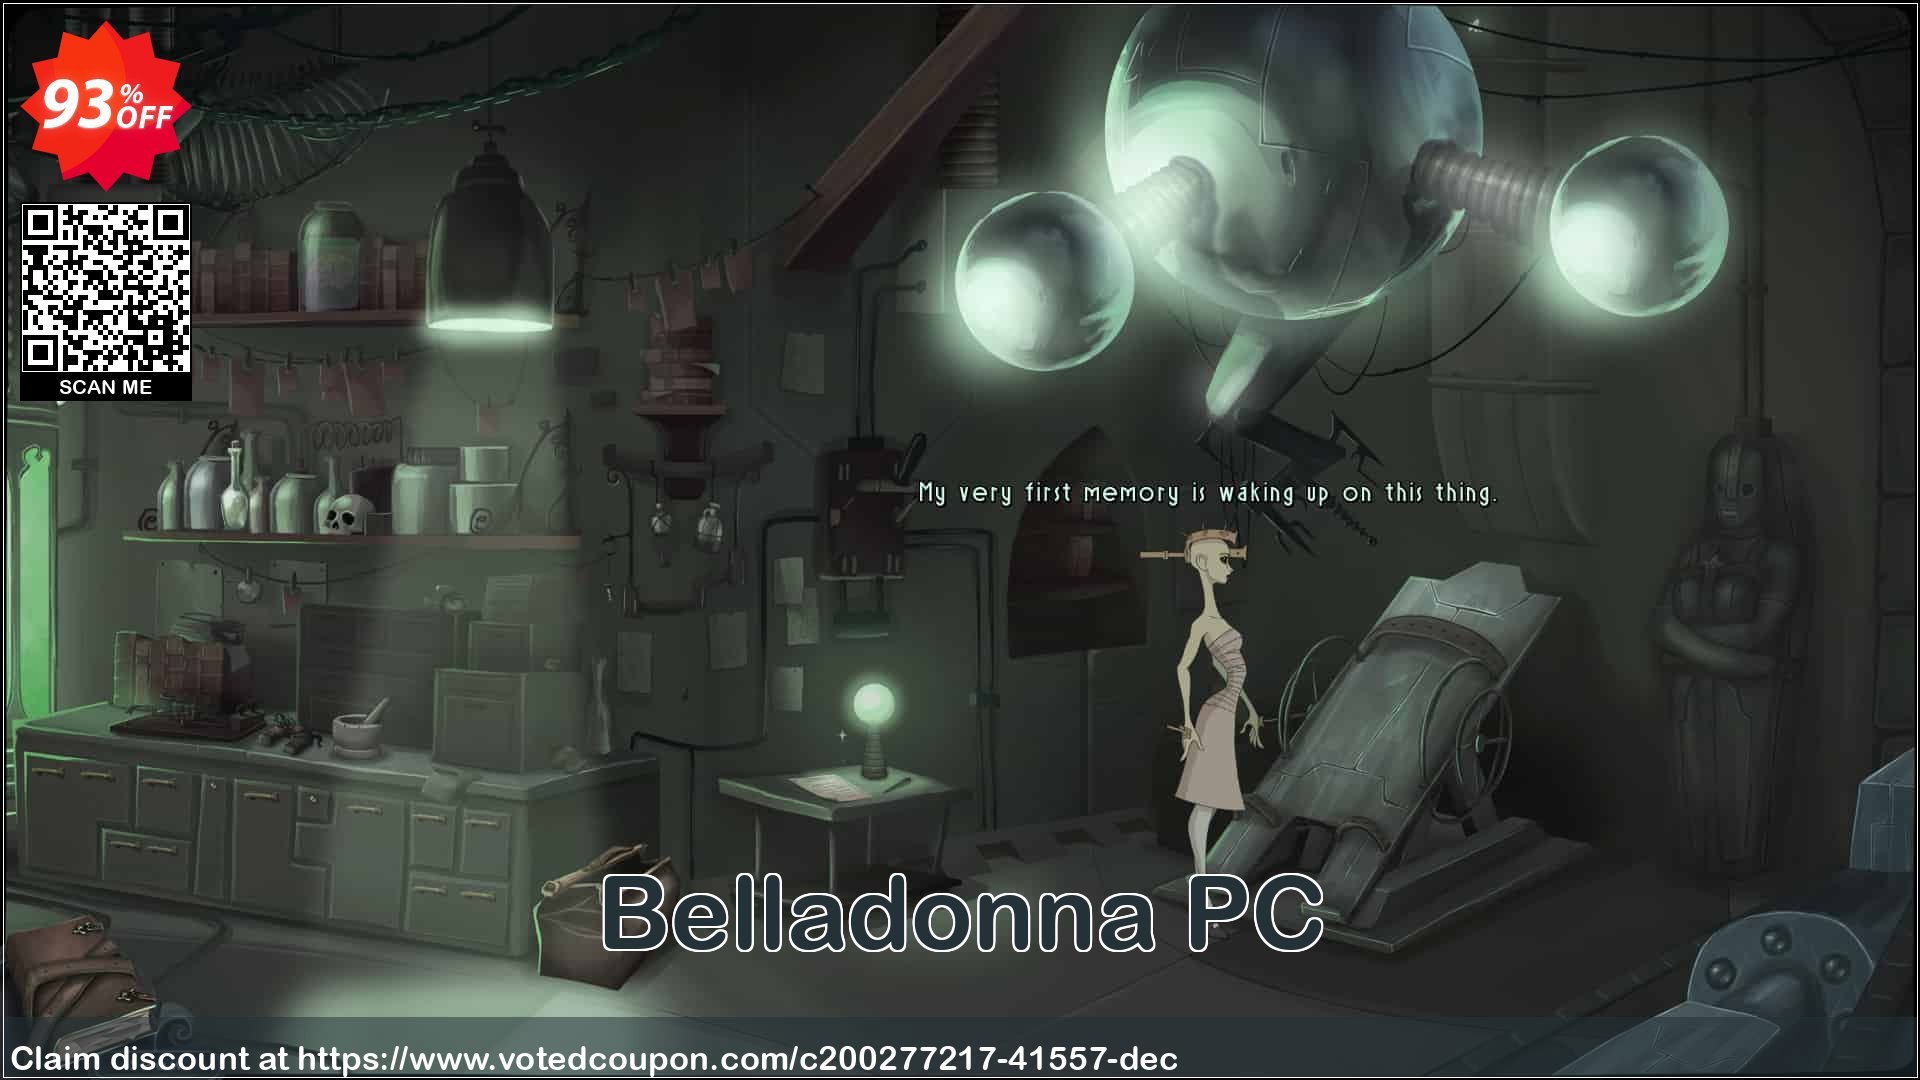 Belladonna PC Coupon Code May 2024, 93% OFF - VotedCoupon